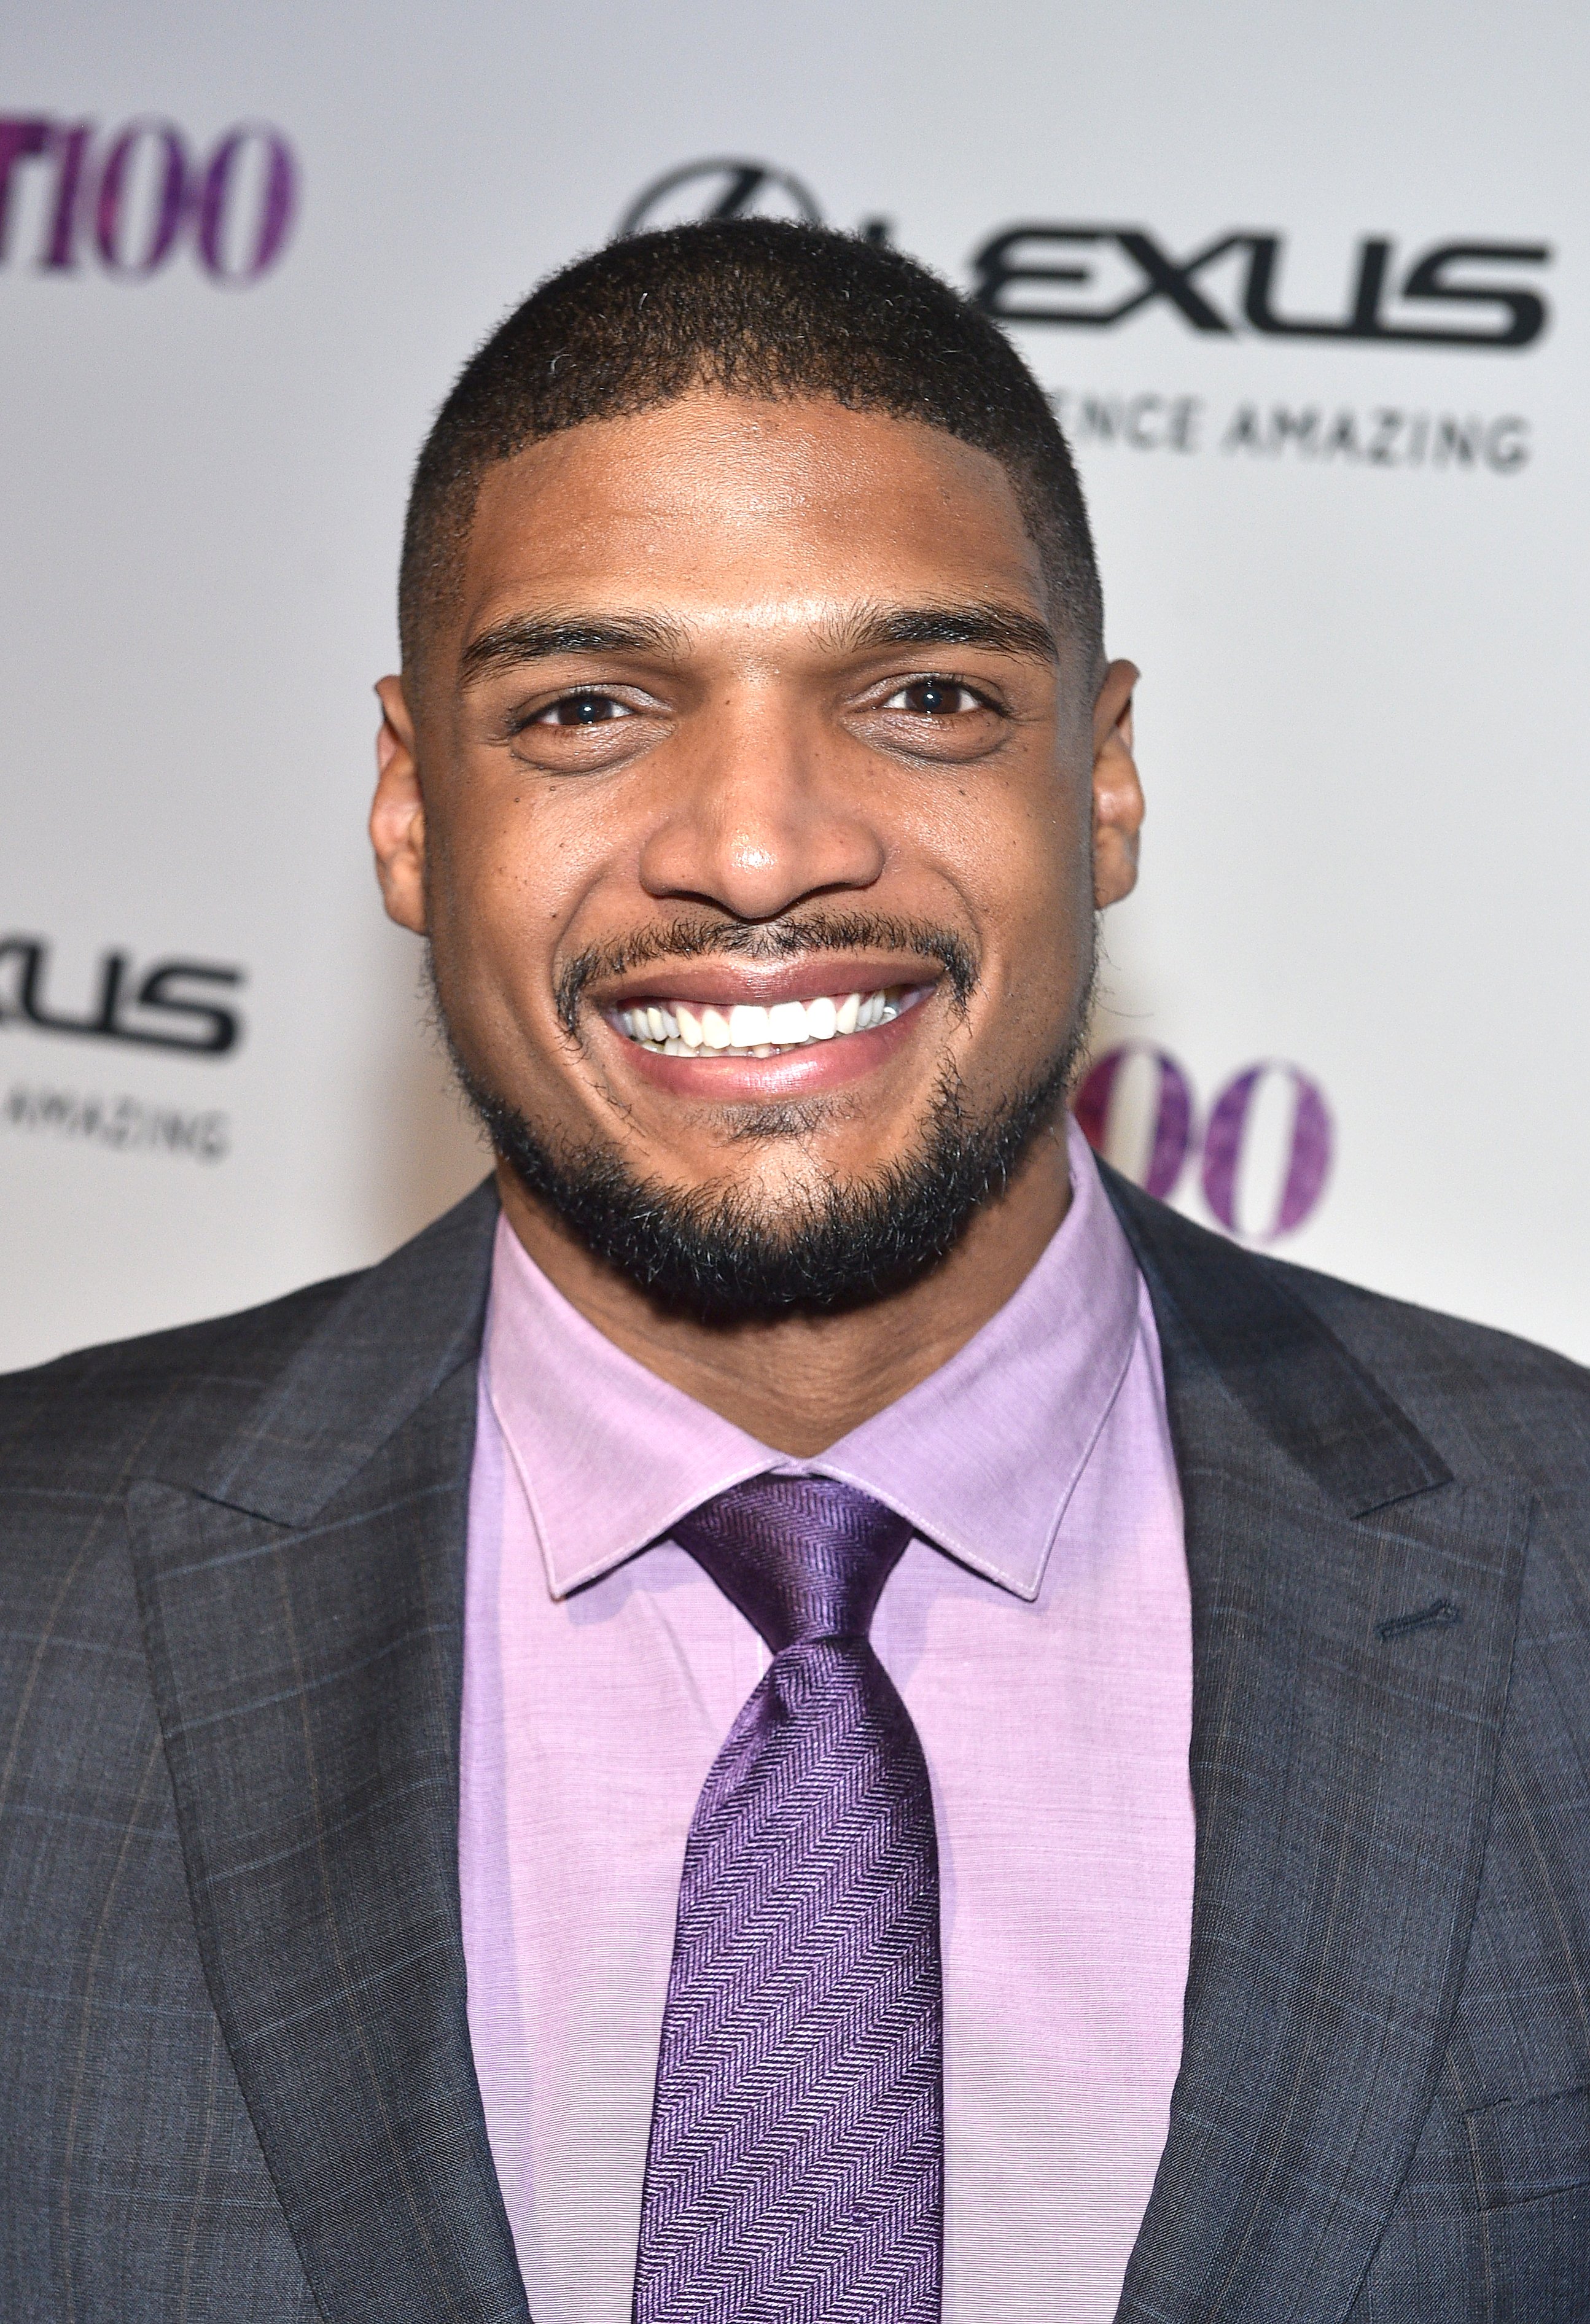 Michael Sam at the OUT Magazine #OUT100 Event in New York City, 2017 | Photo Source: Getty Images